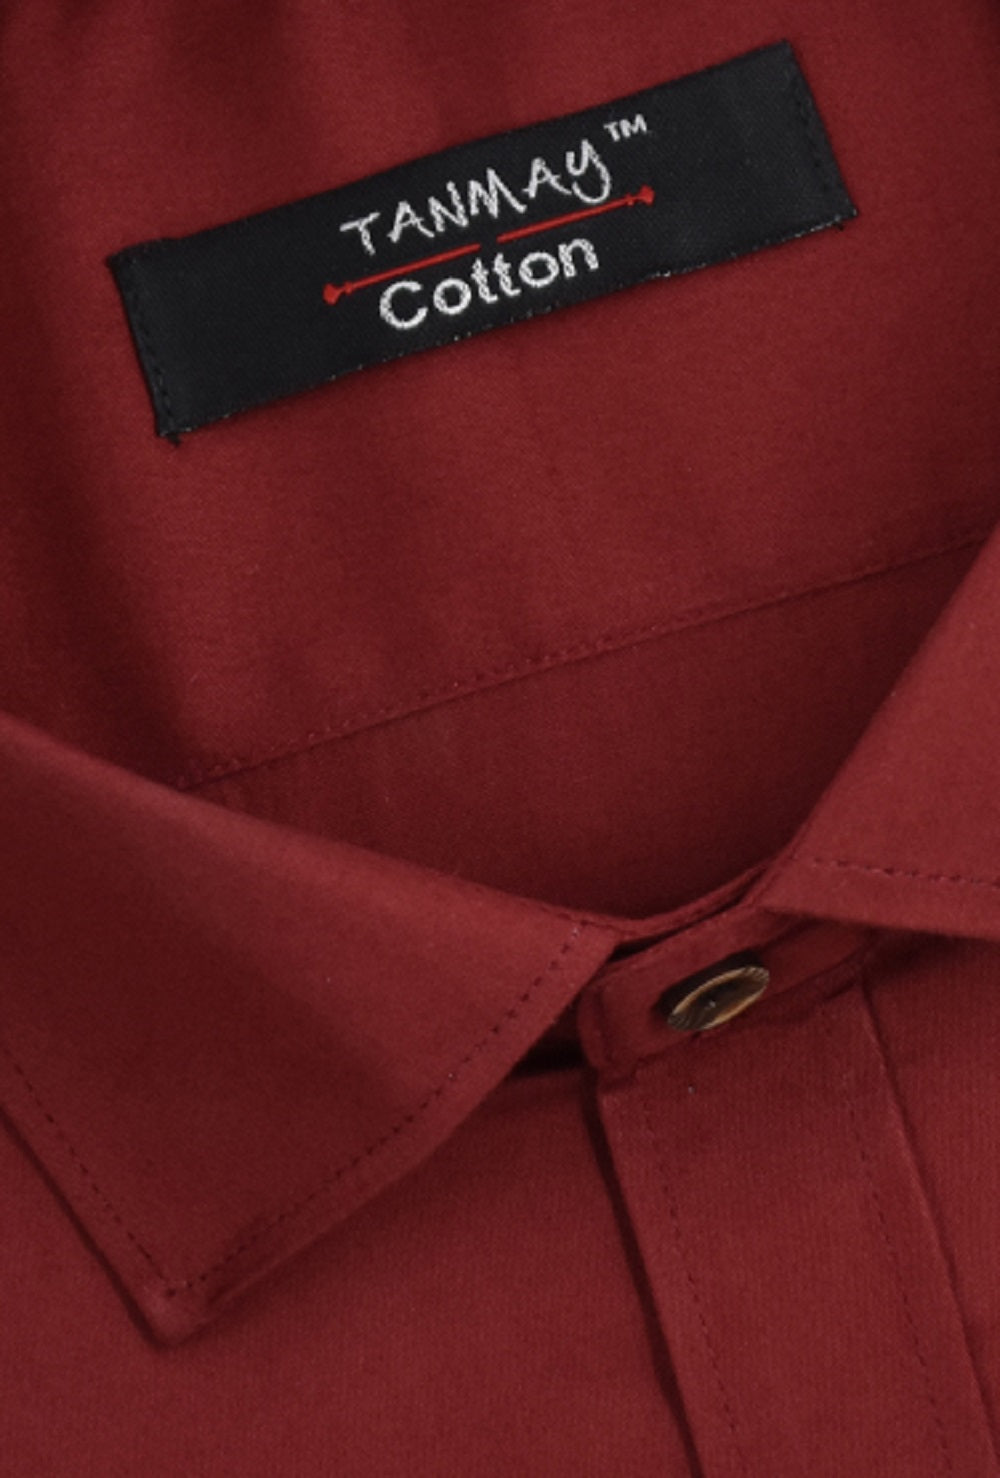 Cotton Tanmay Maroon Color Formal Shirt for Men's